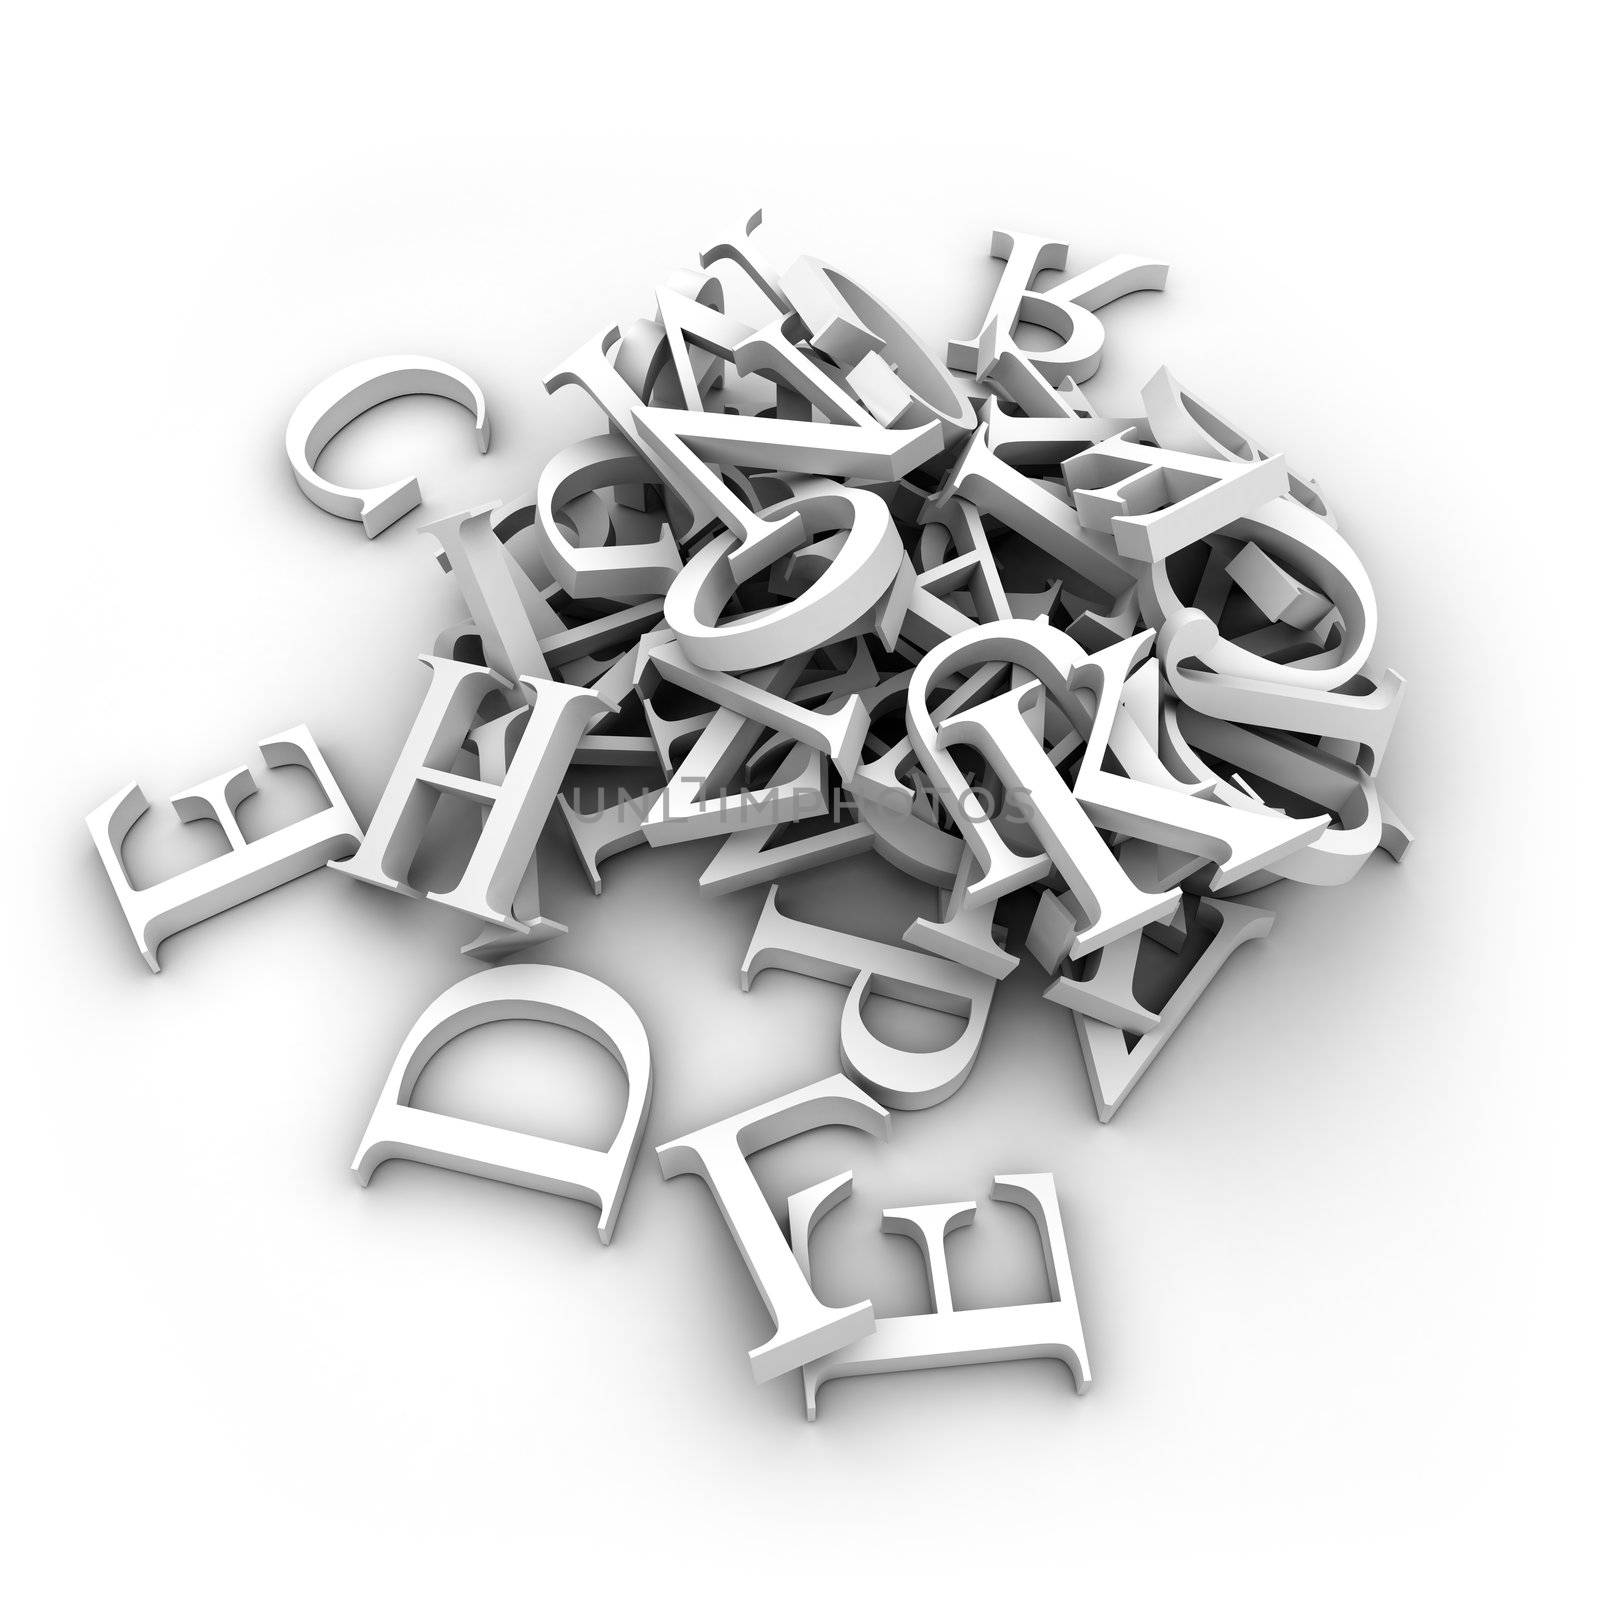 Latin letters poured into a heap, isolated on a white background